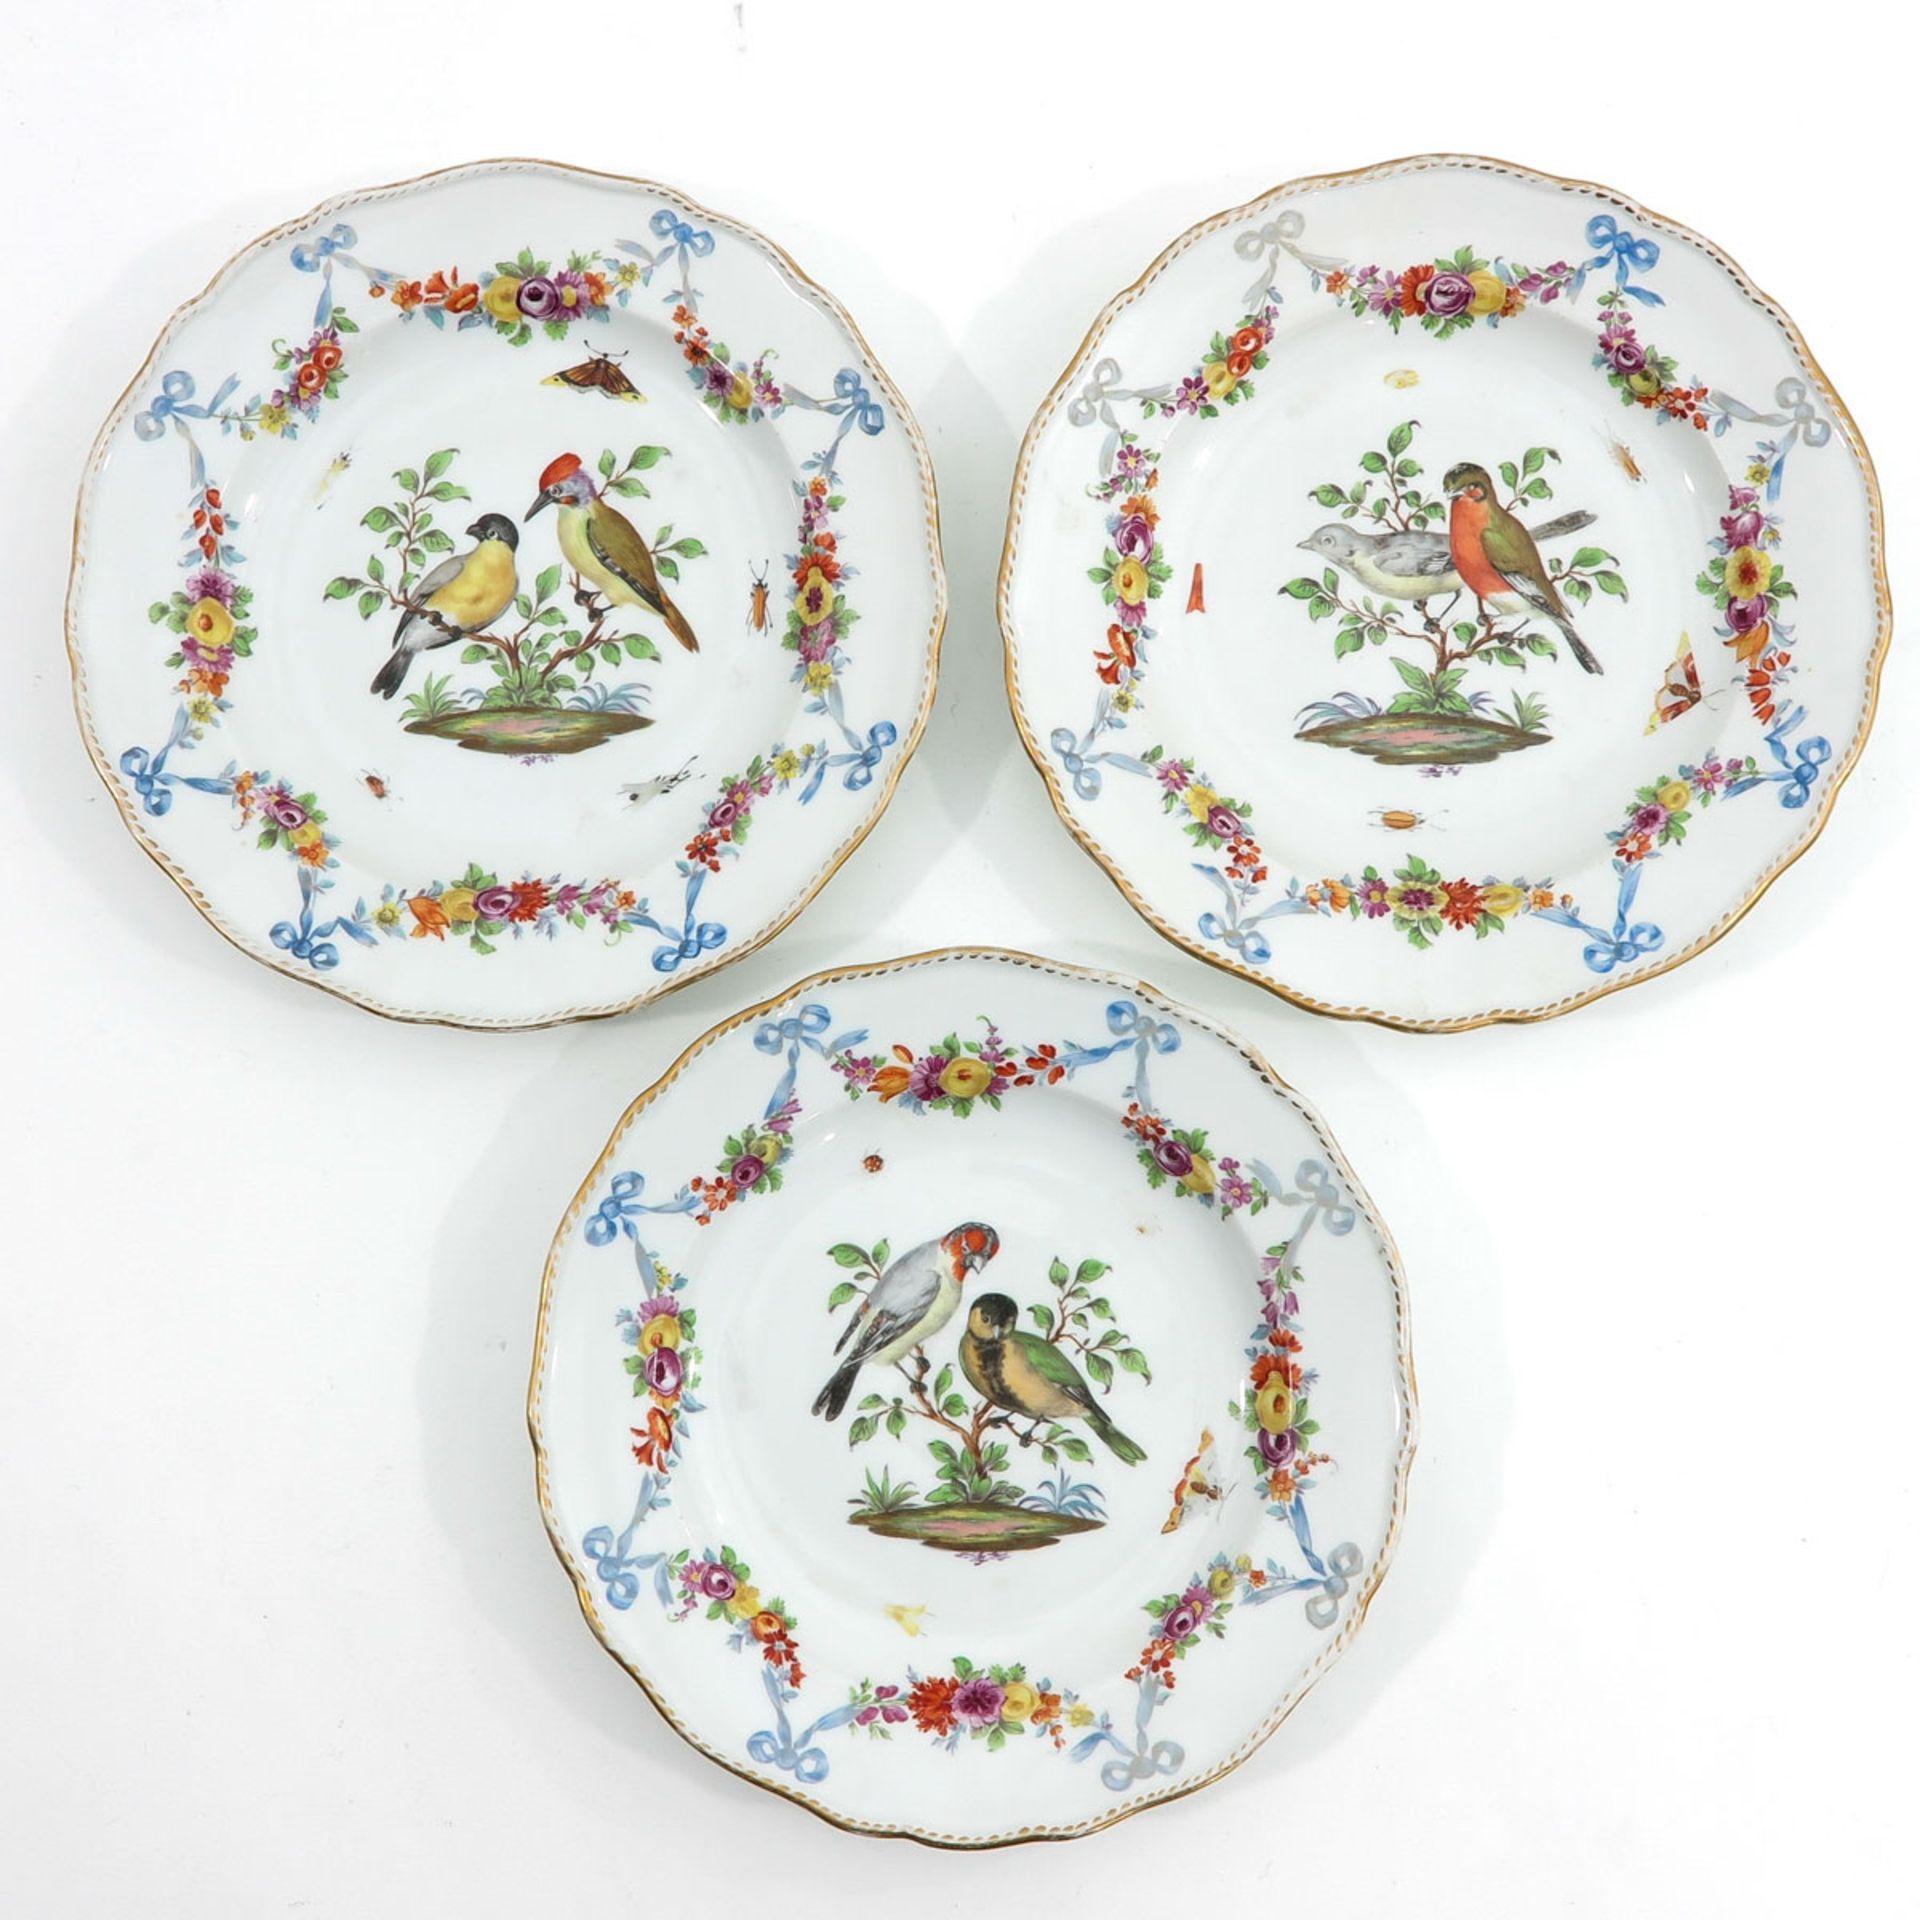 A Lot of 3 18th Century Meissen Plates